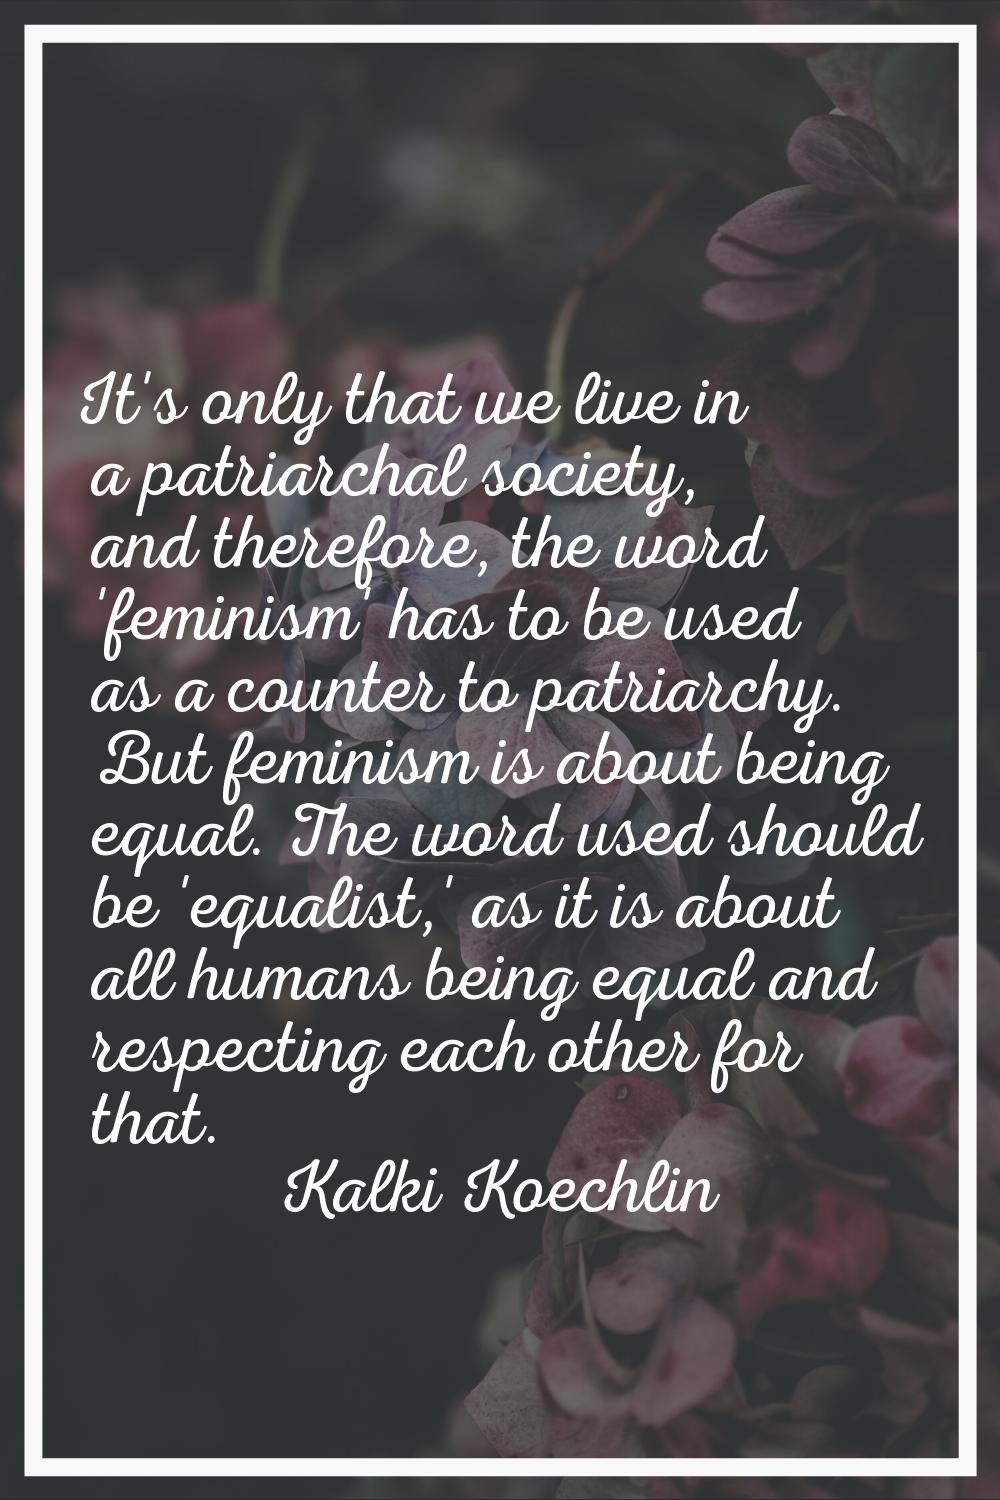 It's only that we live in a patriarchal society, and therefore, the word 'feminism' has to be used 